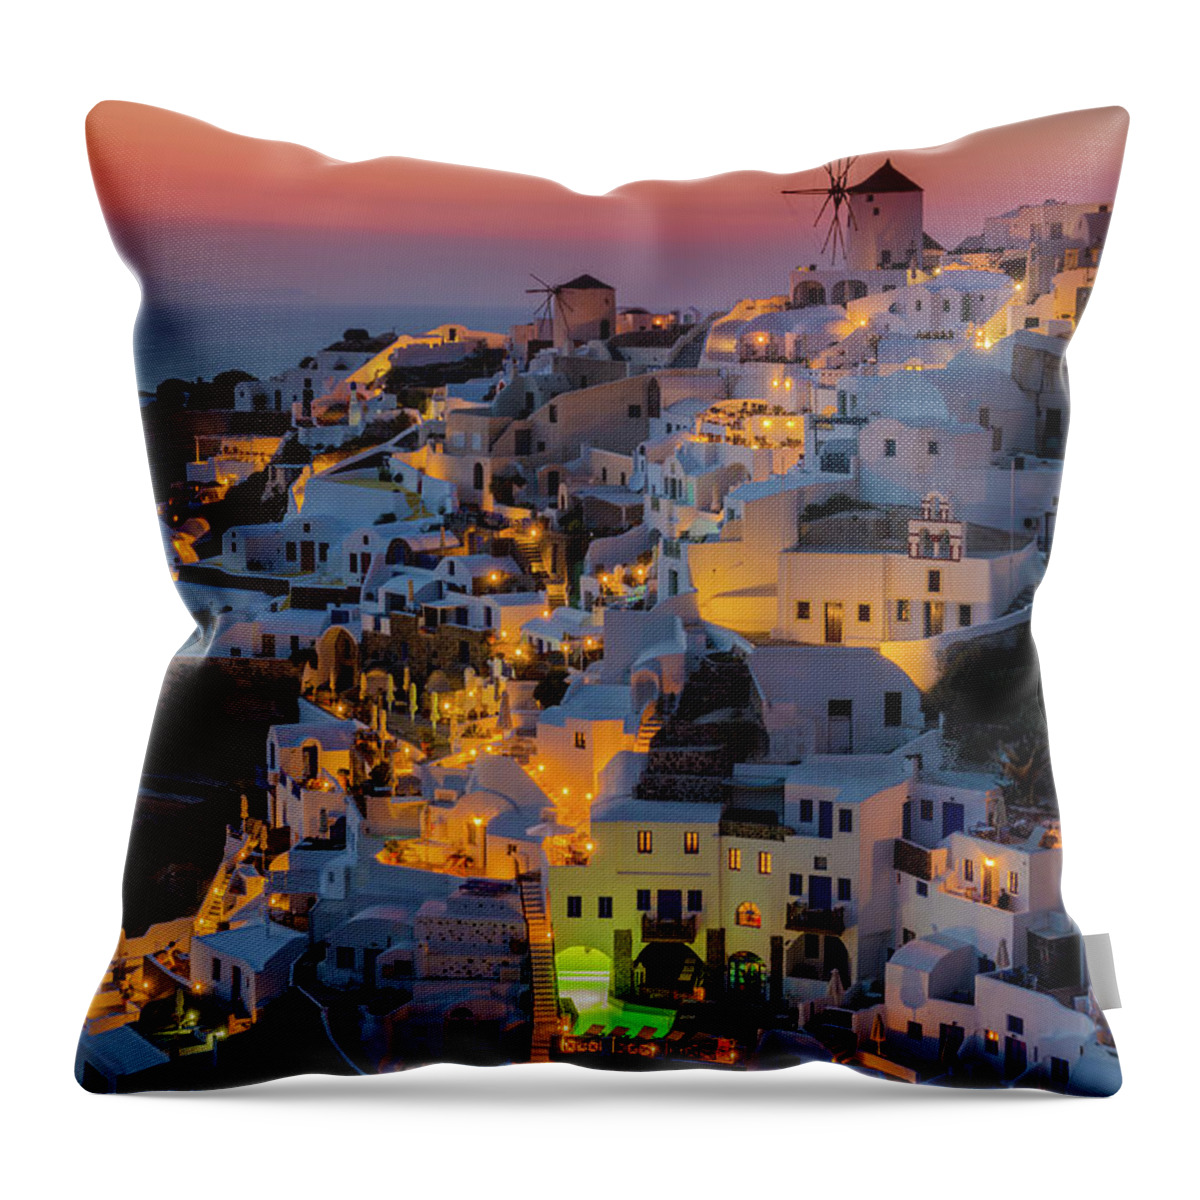 Environmental Conservation Throw Pillow featuring the photograph Oia Colorfull Night by George Papapostolou Photographer